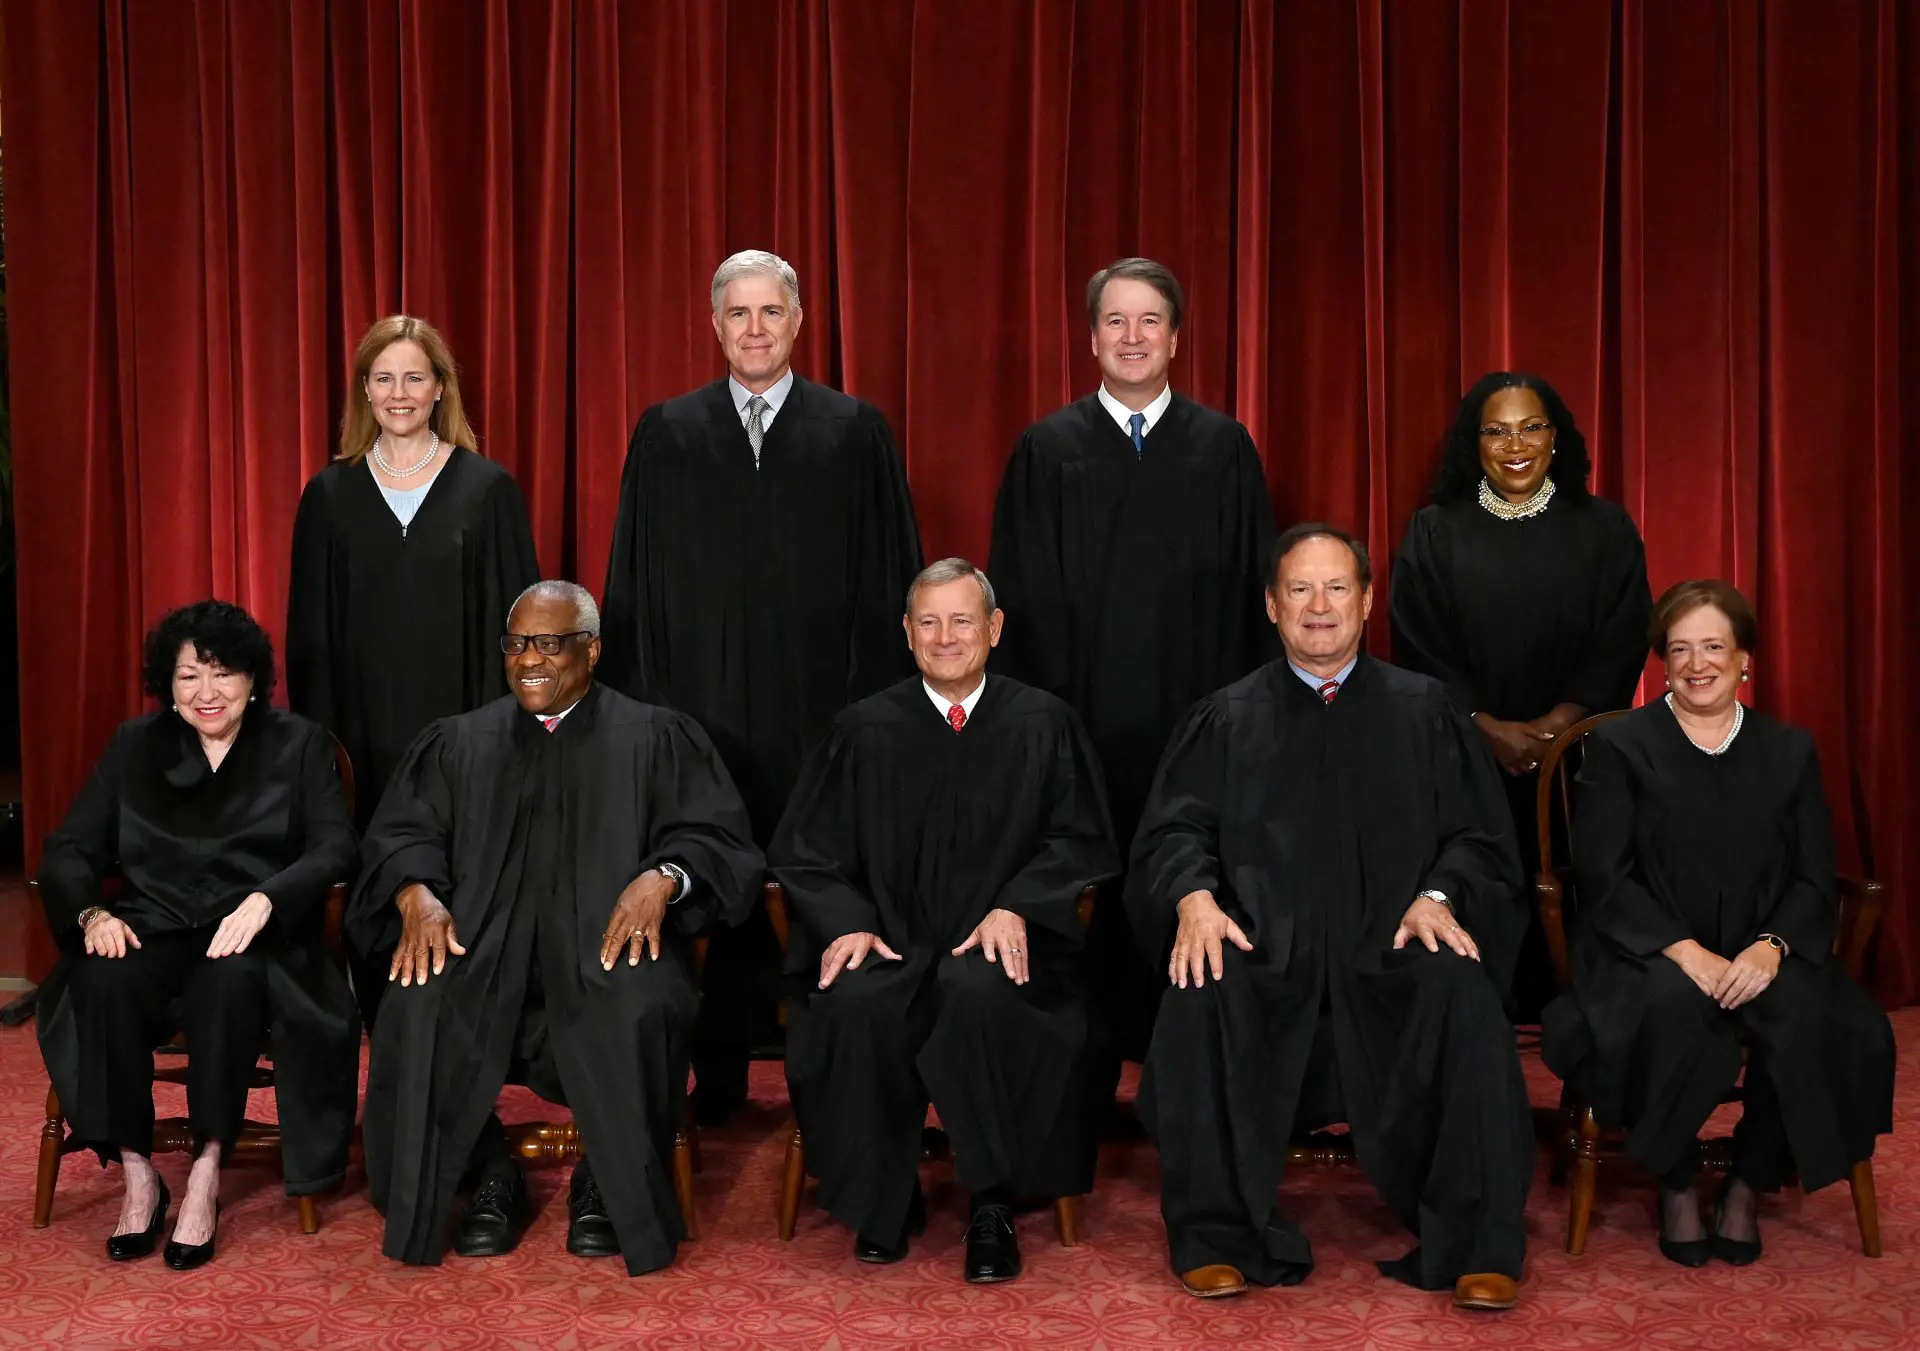 How Wealthy are the U.S. Supreme Court Justices?